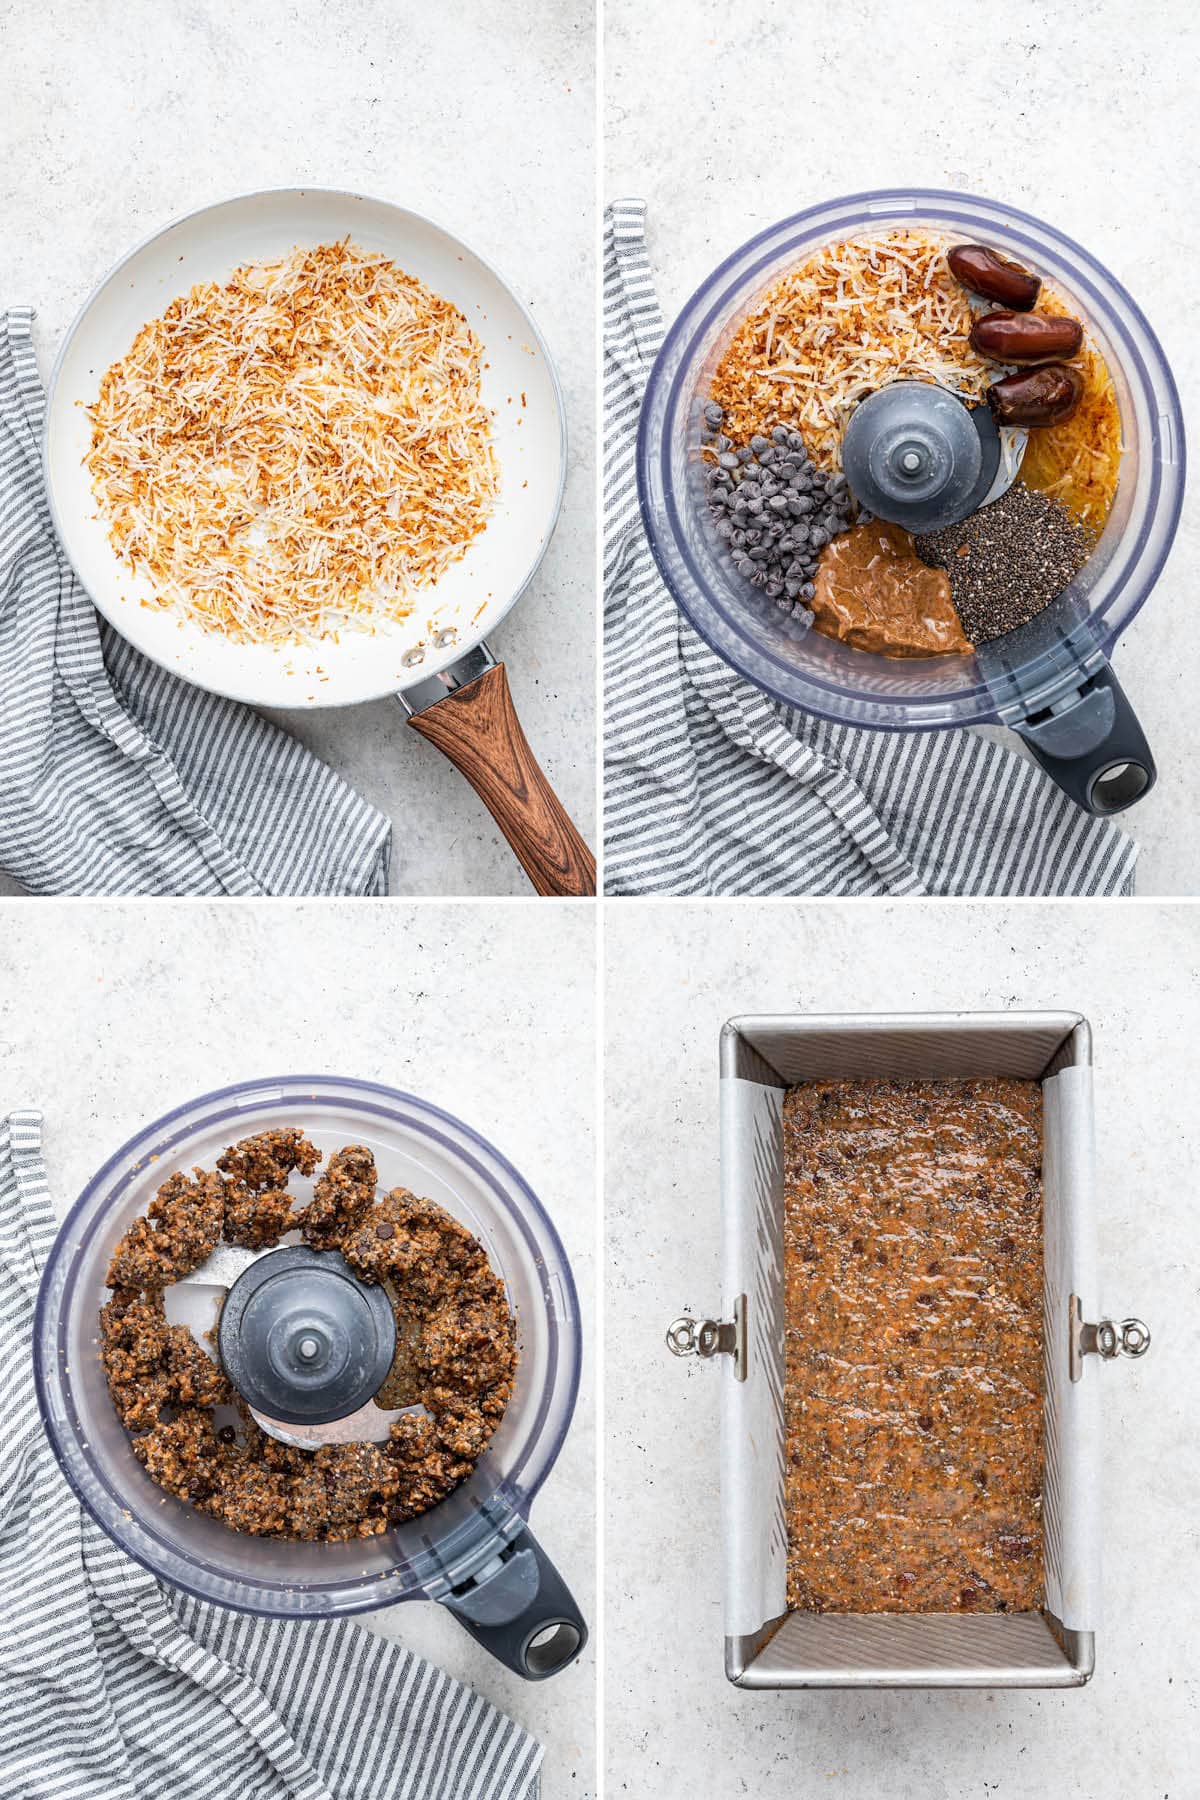 Collage of four photos showing how to make Toasted Coconut Chia Bars: blending ingredients and then adding to a loaf pan to set.